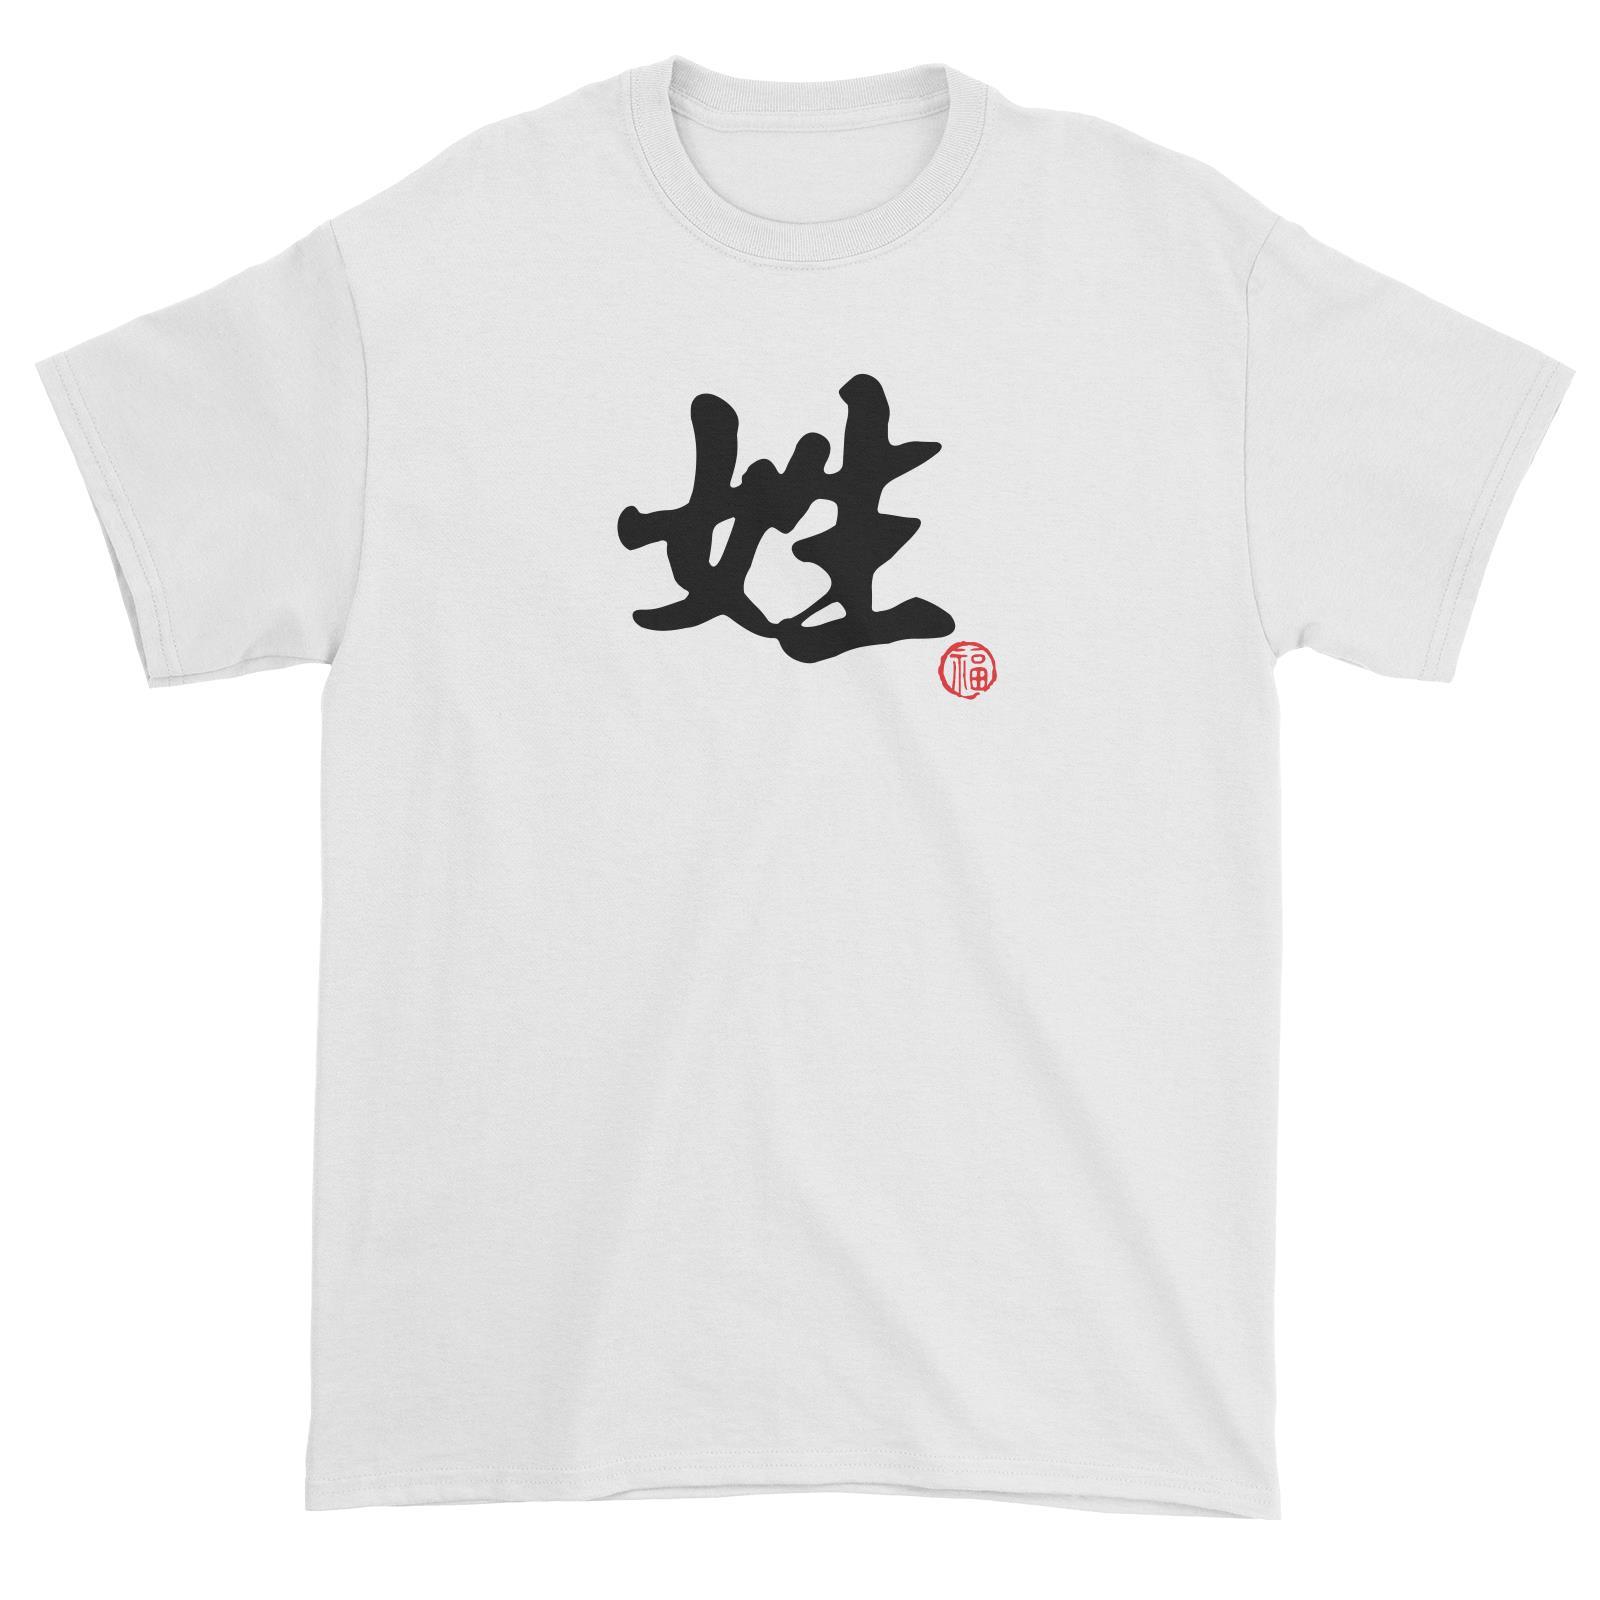 Chinese Surname B&W with Prosperity Seal Unisex T-Shirt Matching Family Personalizable Designs